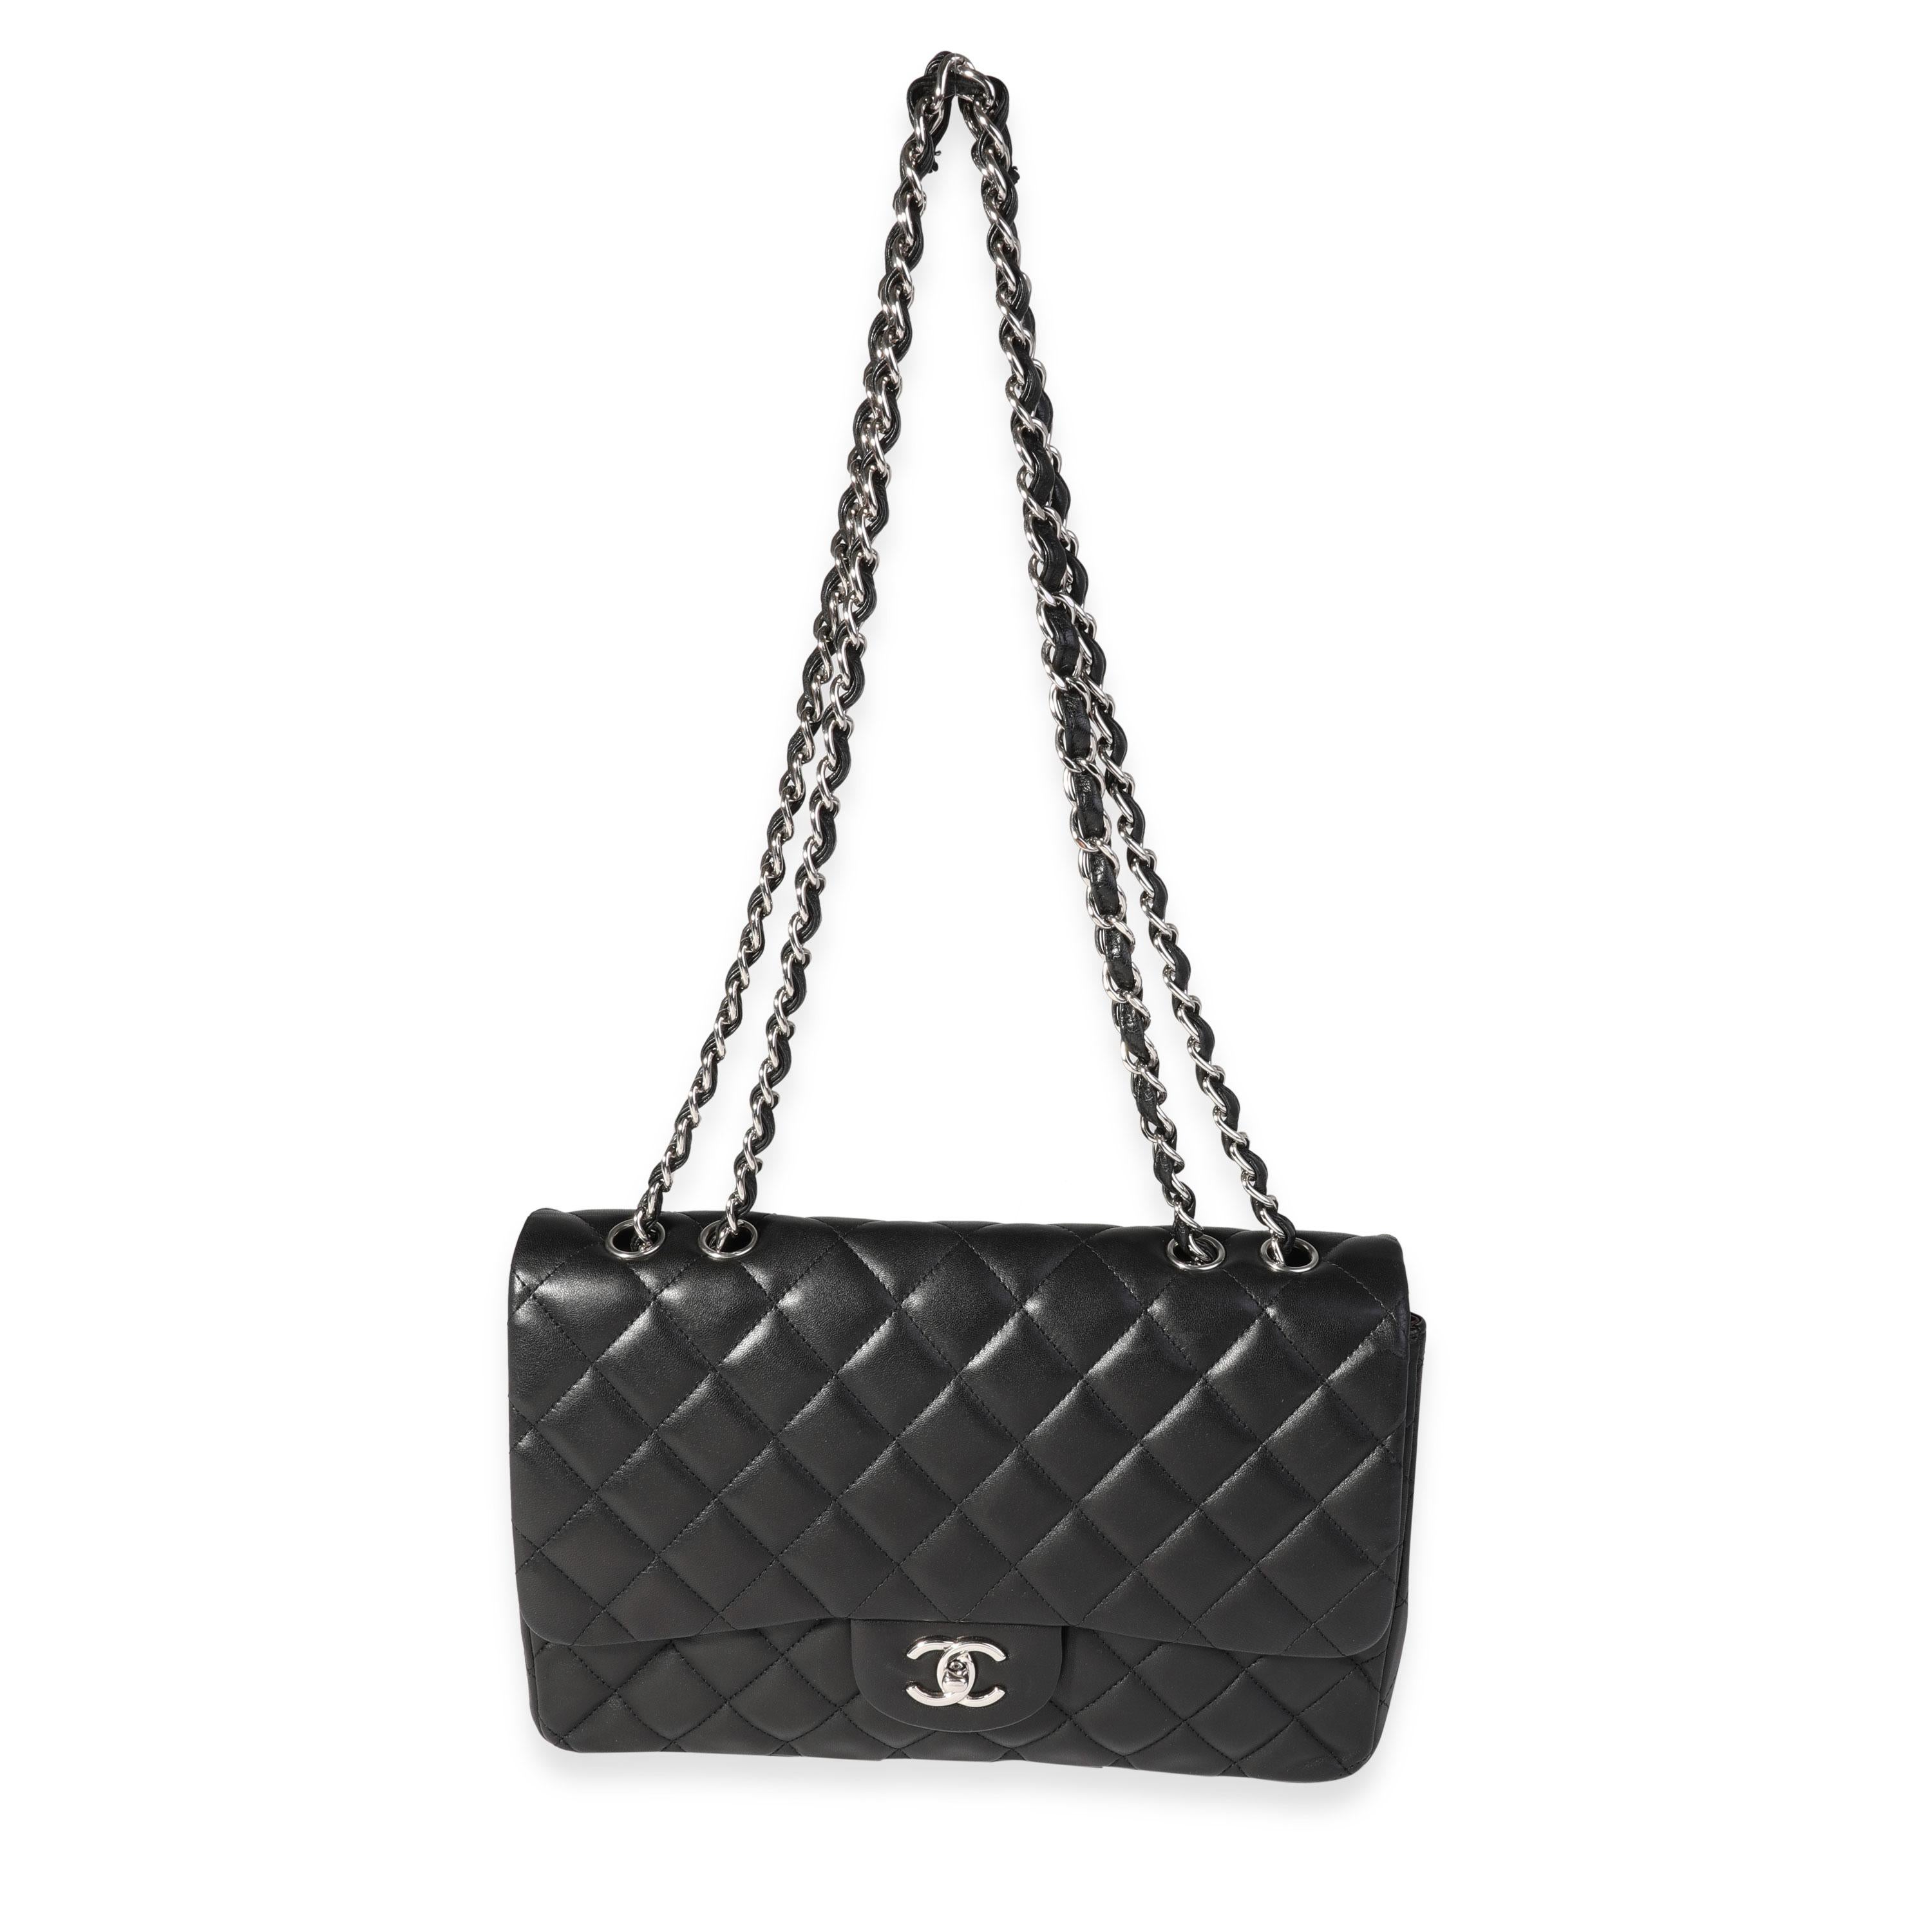 Listing Title: Chanel Black Quilted Lambskin Jumbo Classic Single Flap Bag
SKU: 121323
MSRP: 9500.00
Condition: Pre-owned 
Handbag Condition: Good
Condition Comments: Good Condition. Scuffing to corners and throughout exterior. Light scratching to